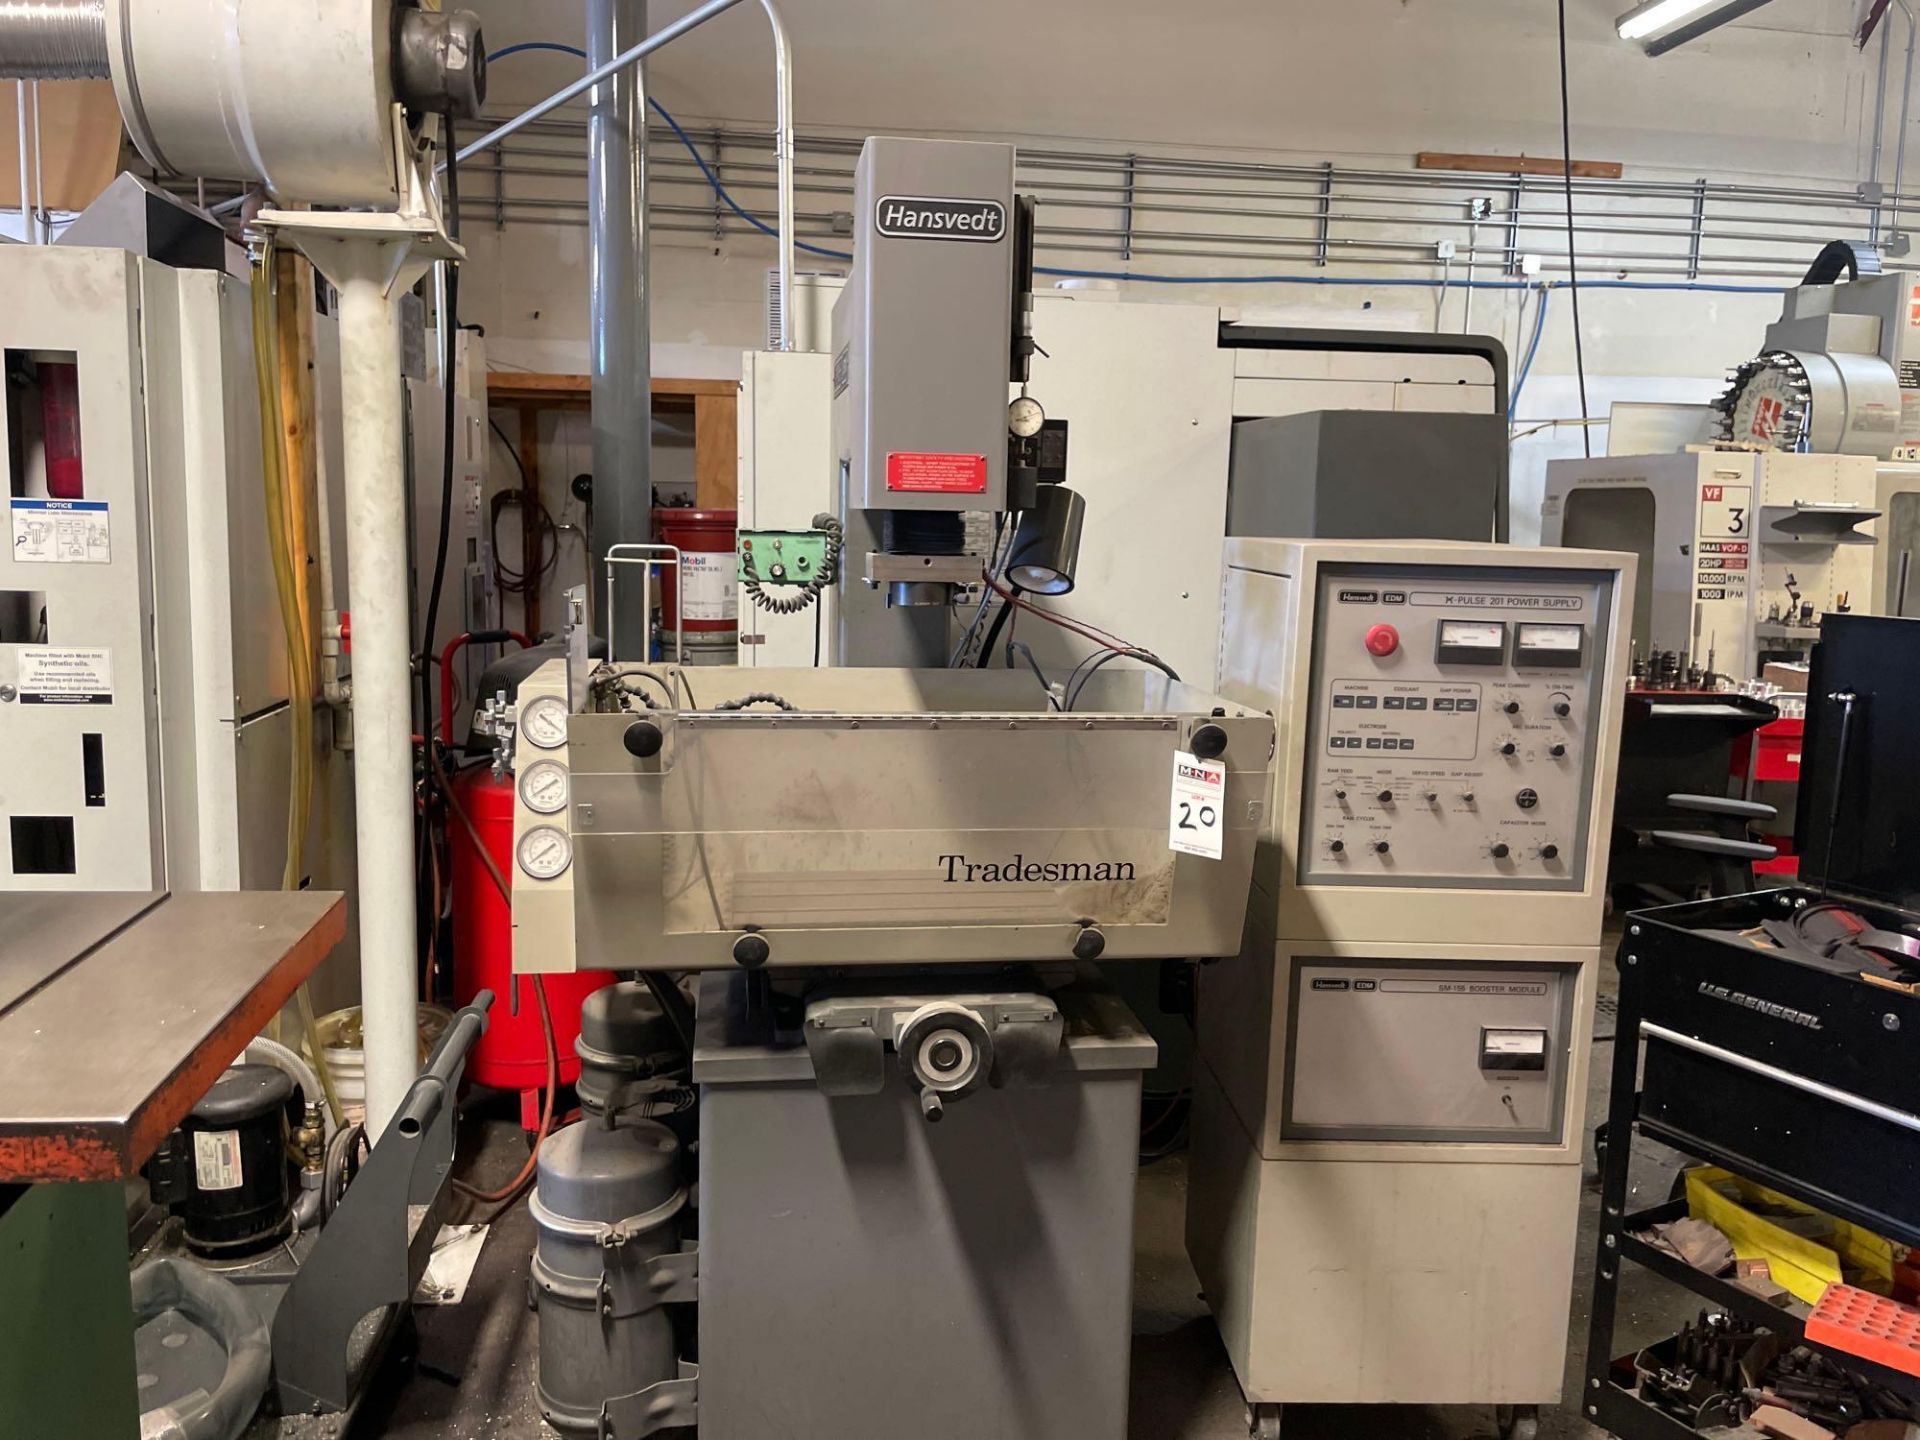 Hansvedt Tradesman SM-155 Sinker EDM, C axis, DRO with EDM Roto Bore Cutting Head and Extra Parts